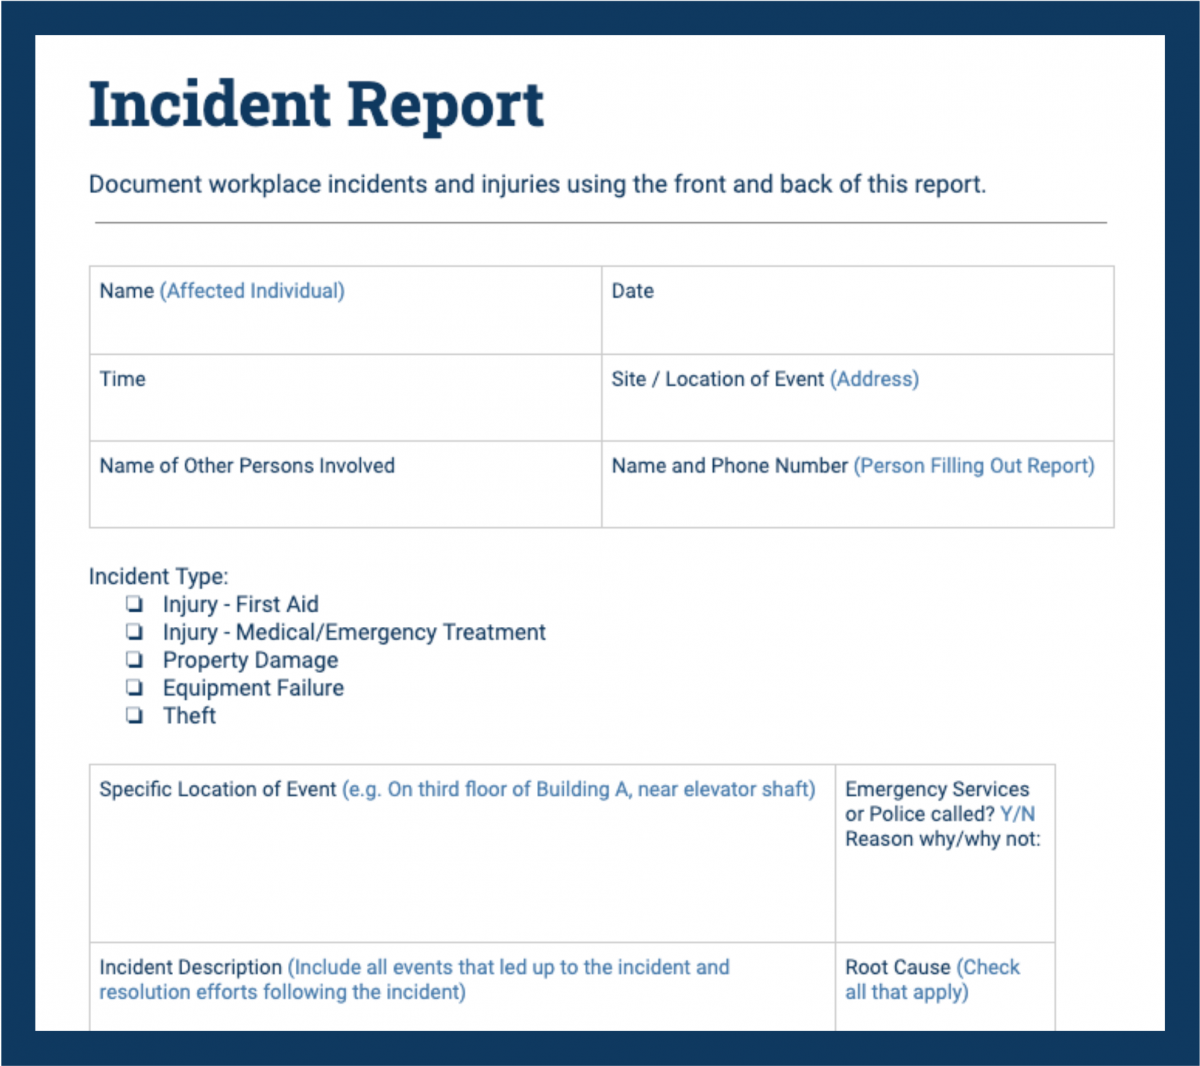 Incident Report Samples to Help You Describe Accidents - Safesite Pertaining To Construction Accident Report Template